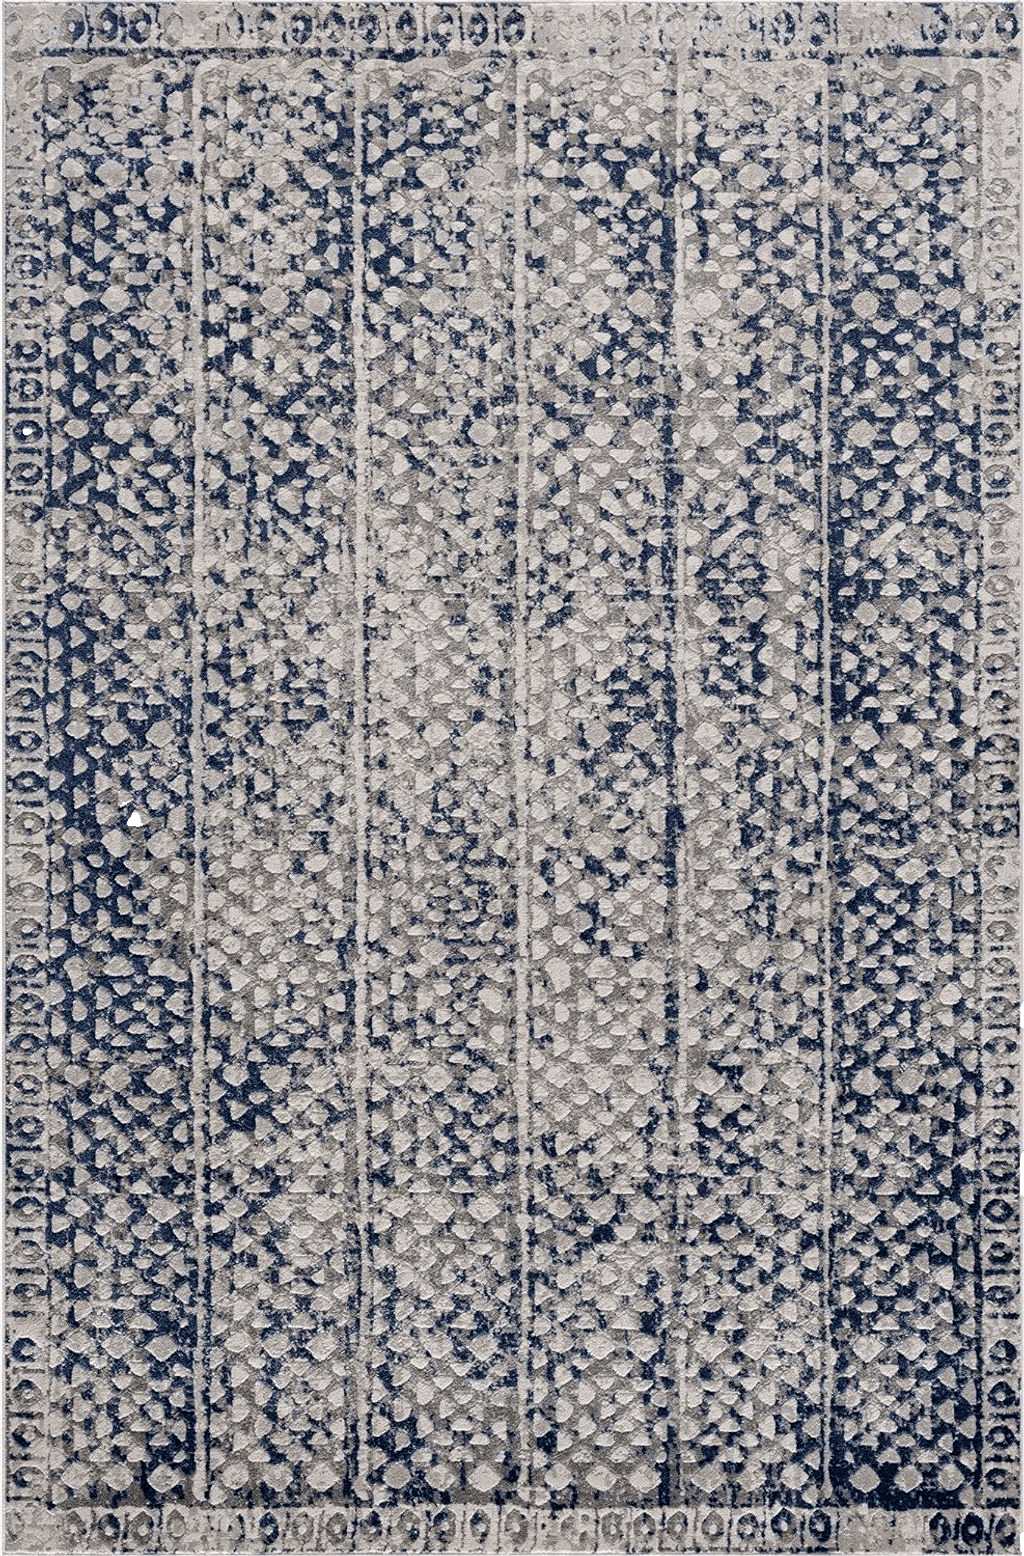 Caria Bloom Rugs Troya Gray/Blue 5x7 Rug - Modern Abstract Area Rug for Living Room, Bedroom, Dining Room, and Kitchen - Exact Size: 5' x 7'5"